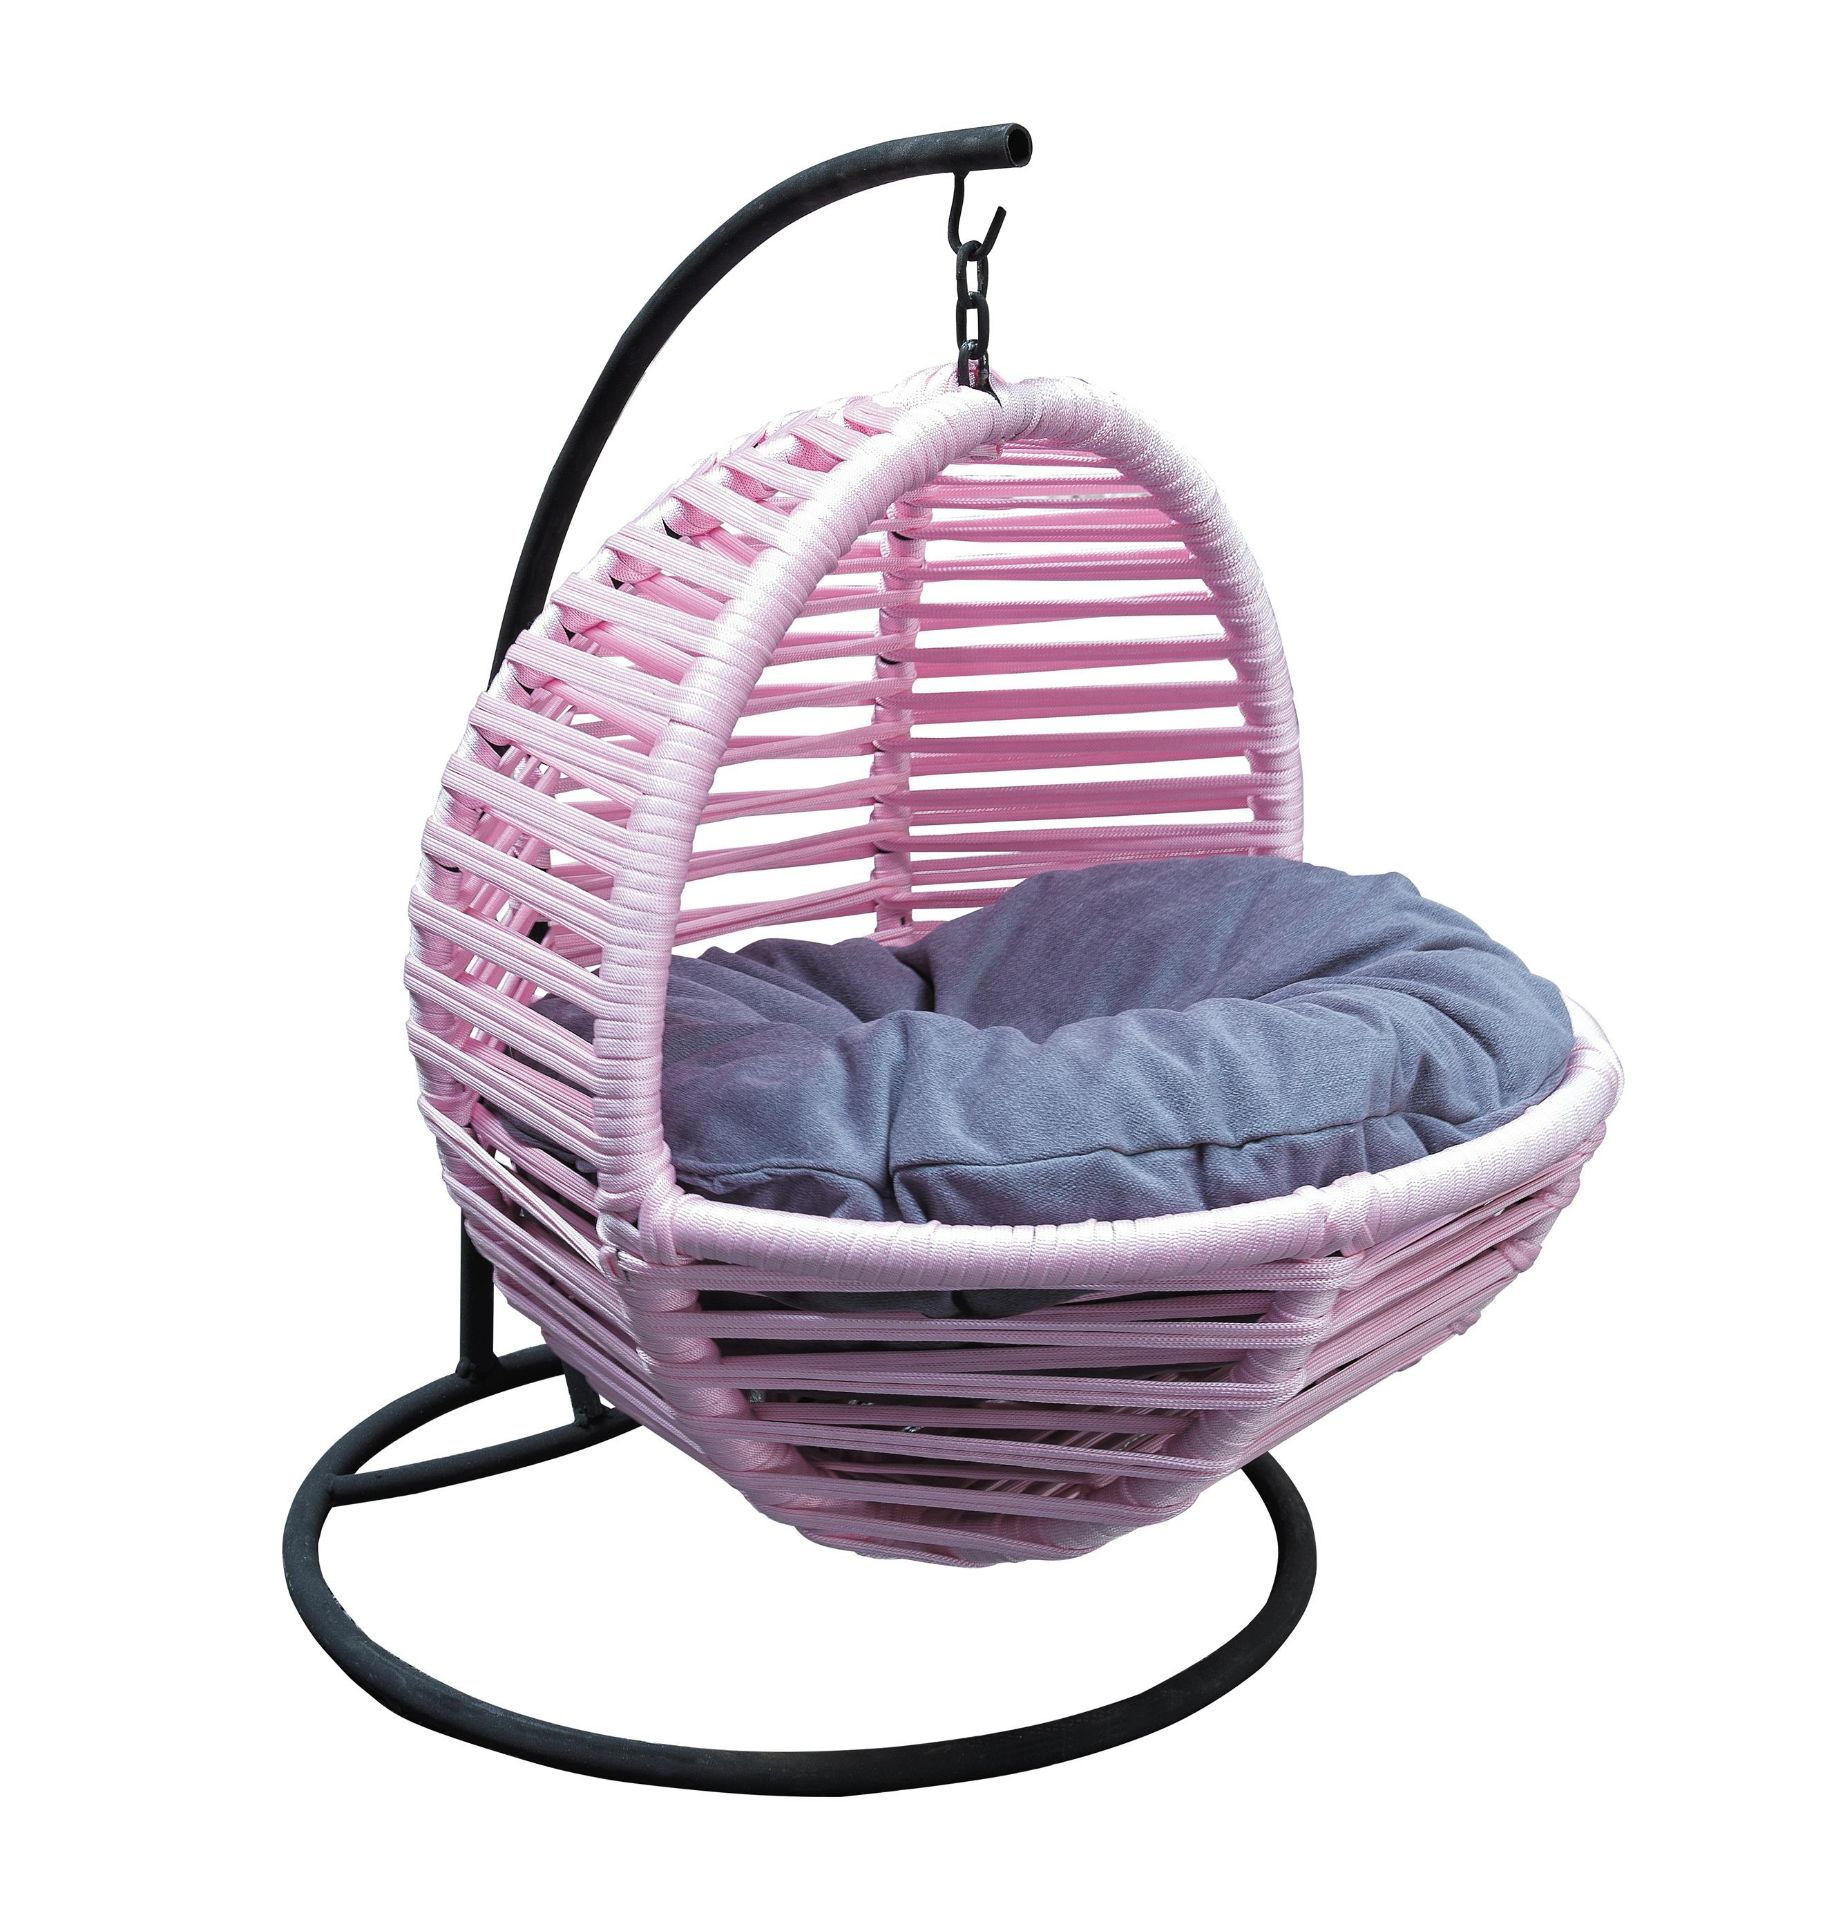 + VAT Brand New SRP £49.99 The Chelsea Garden Co Special Edition Pet Swing Chair/Bed - Pink -